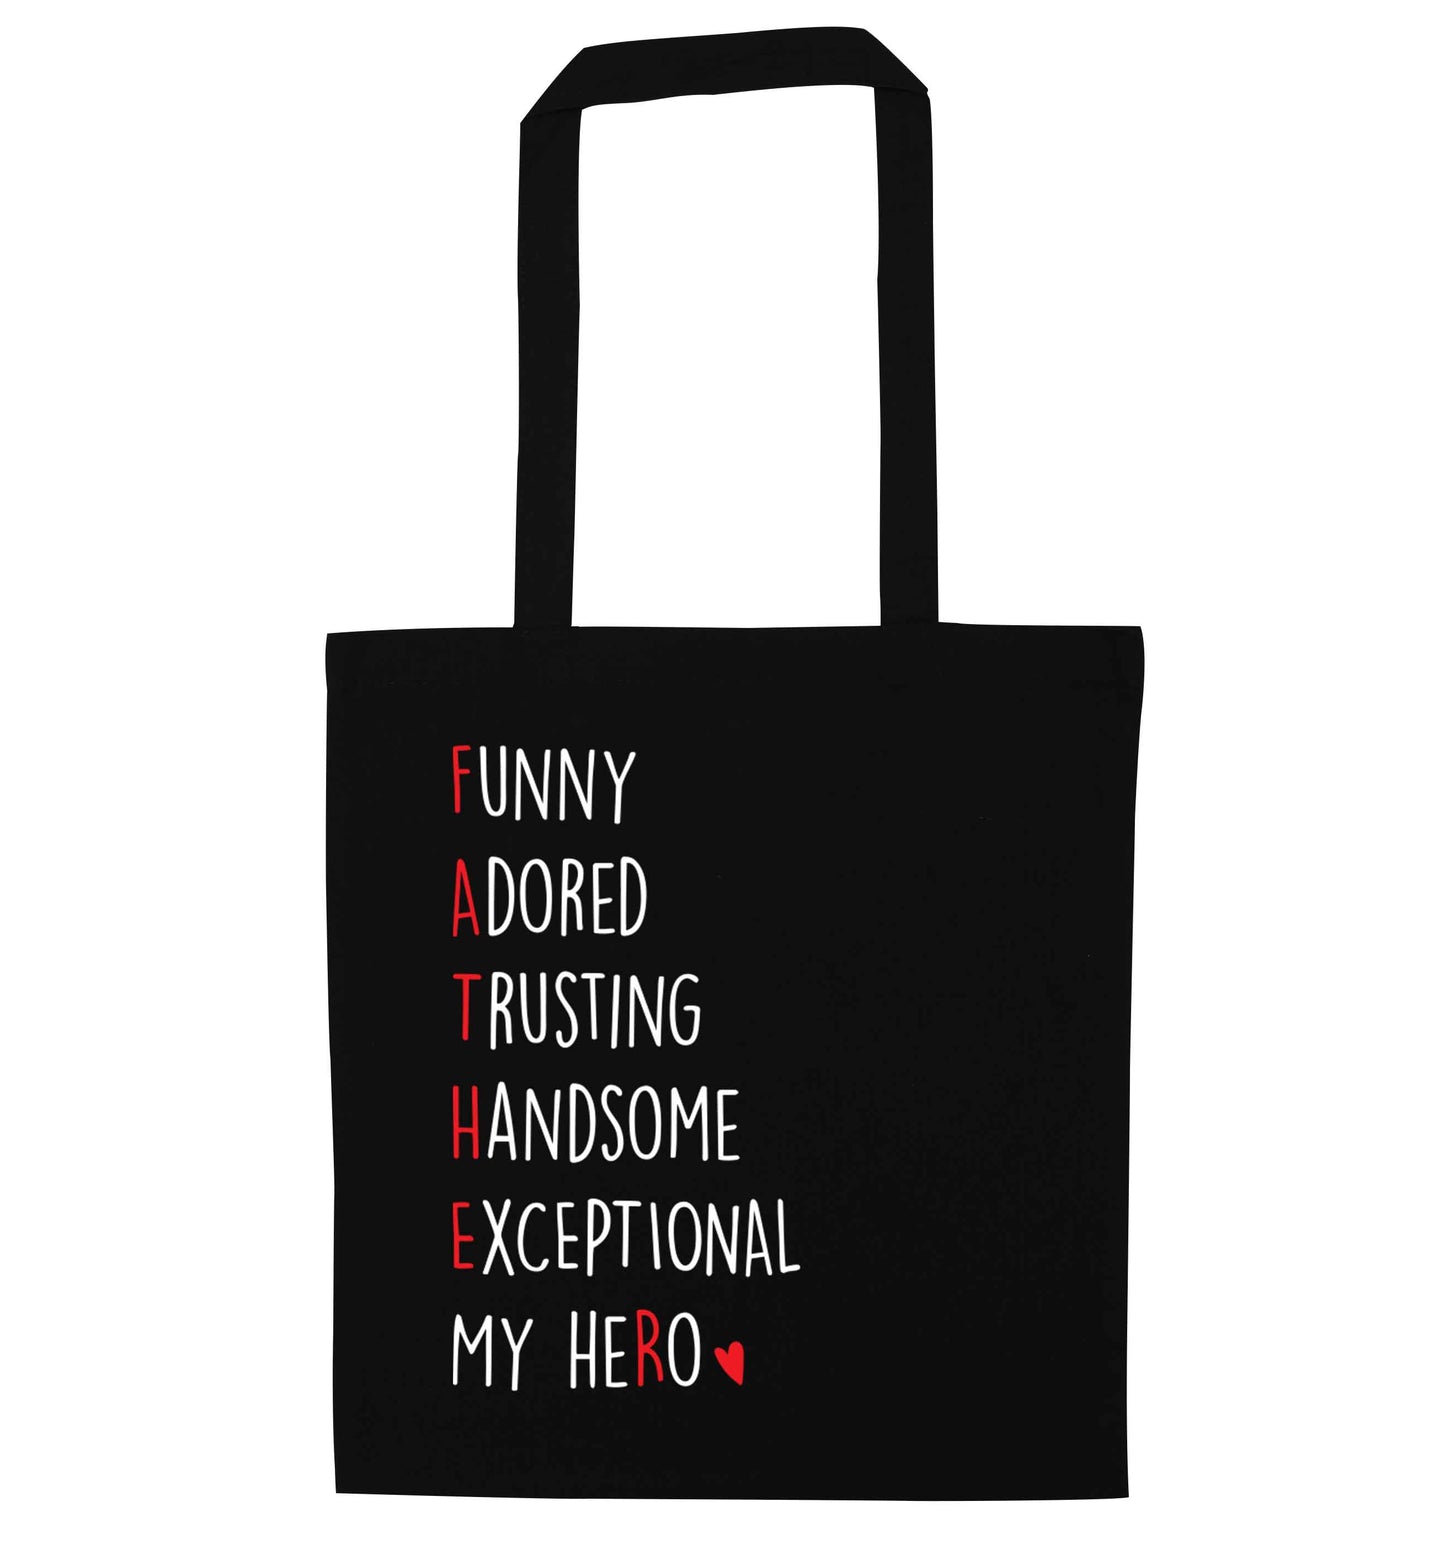 Father meaning hero acrostic poem black tote bag